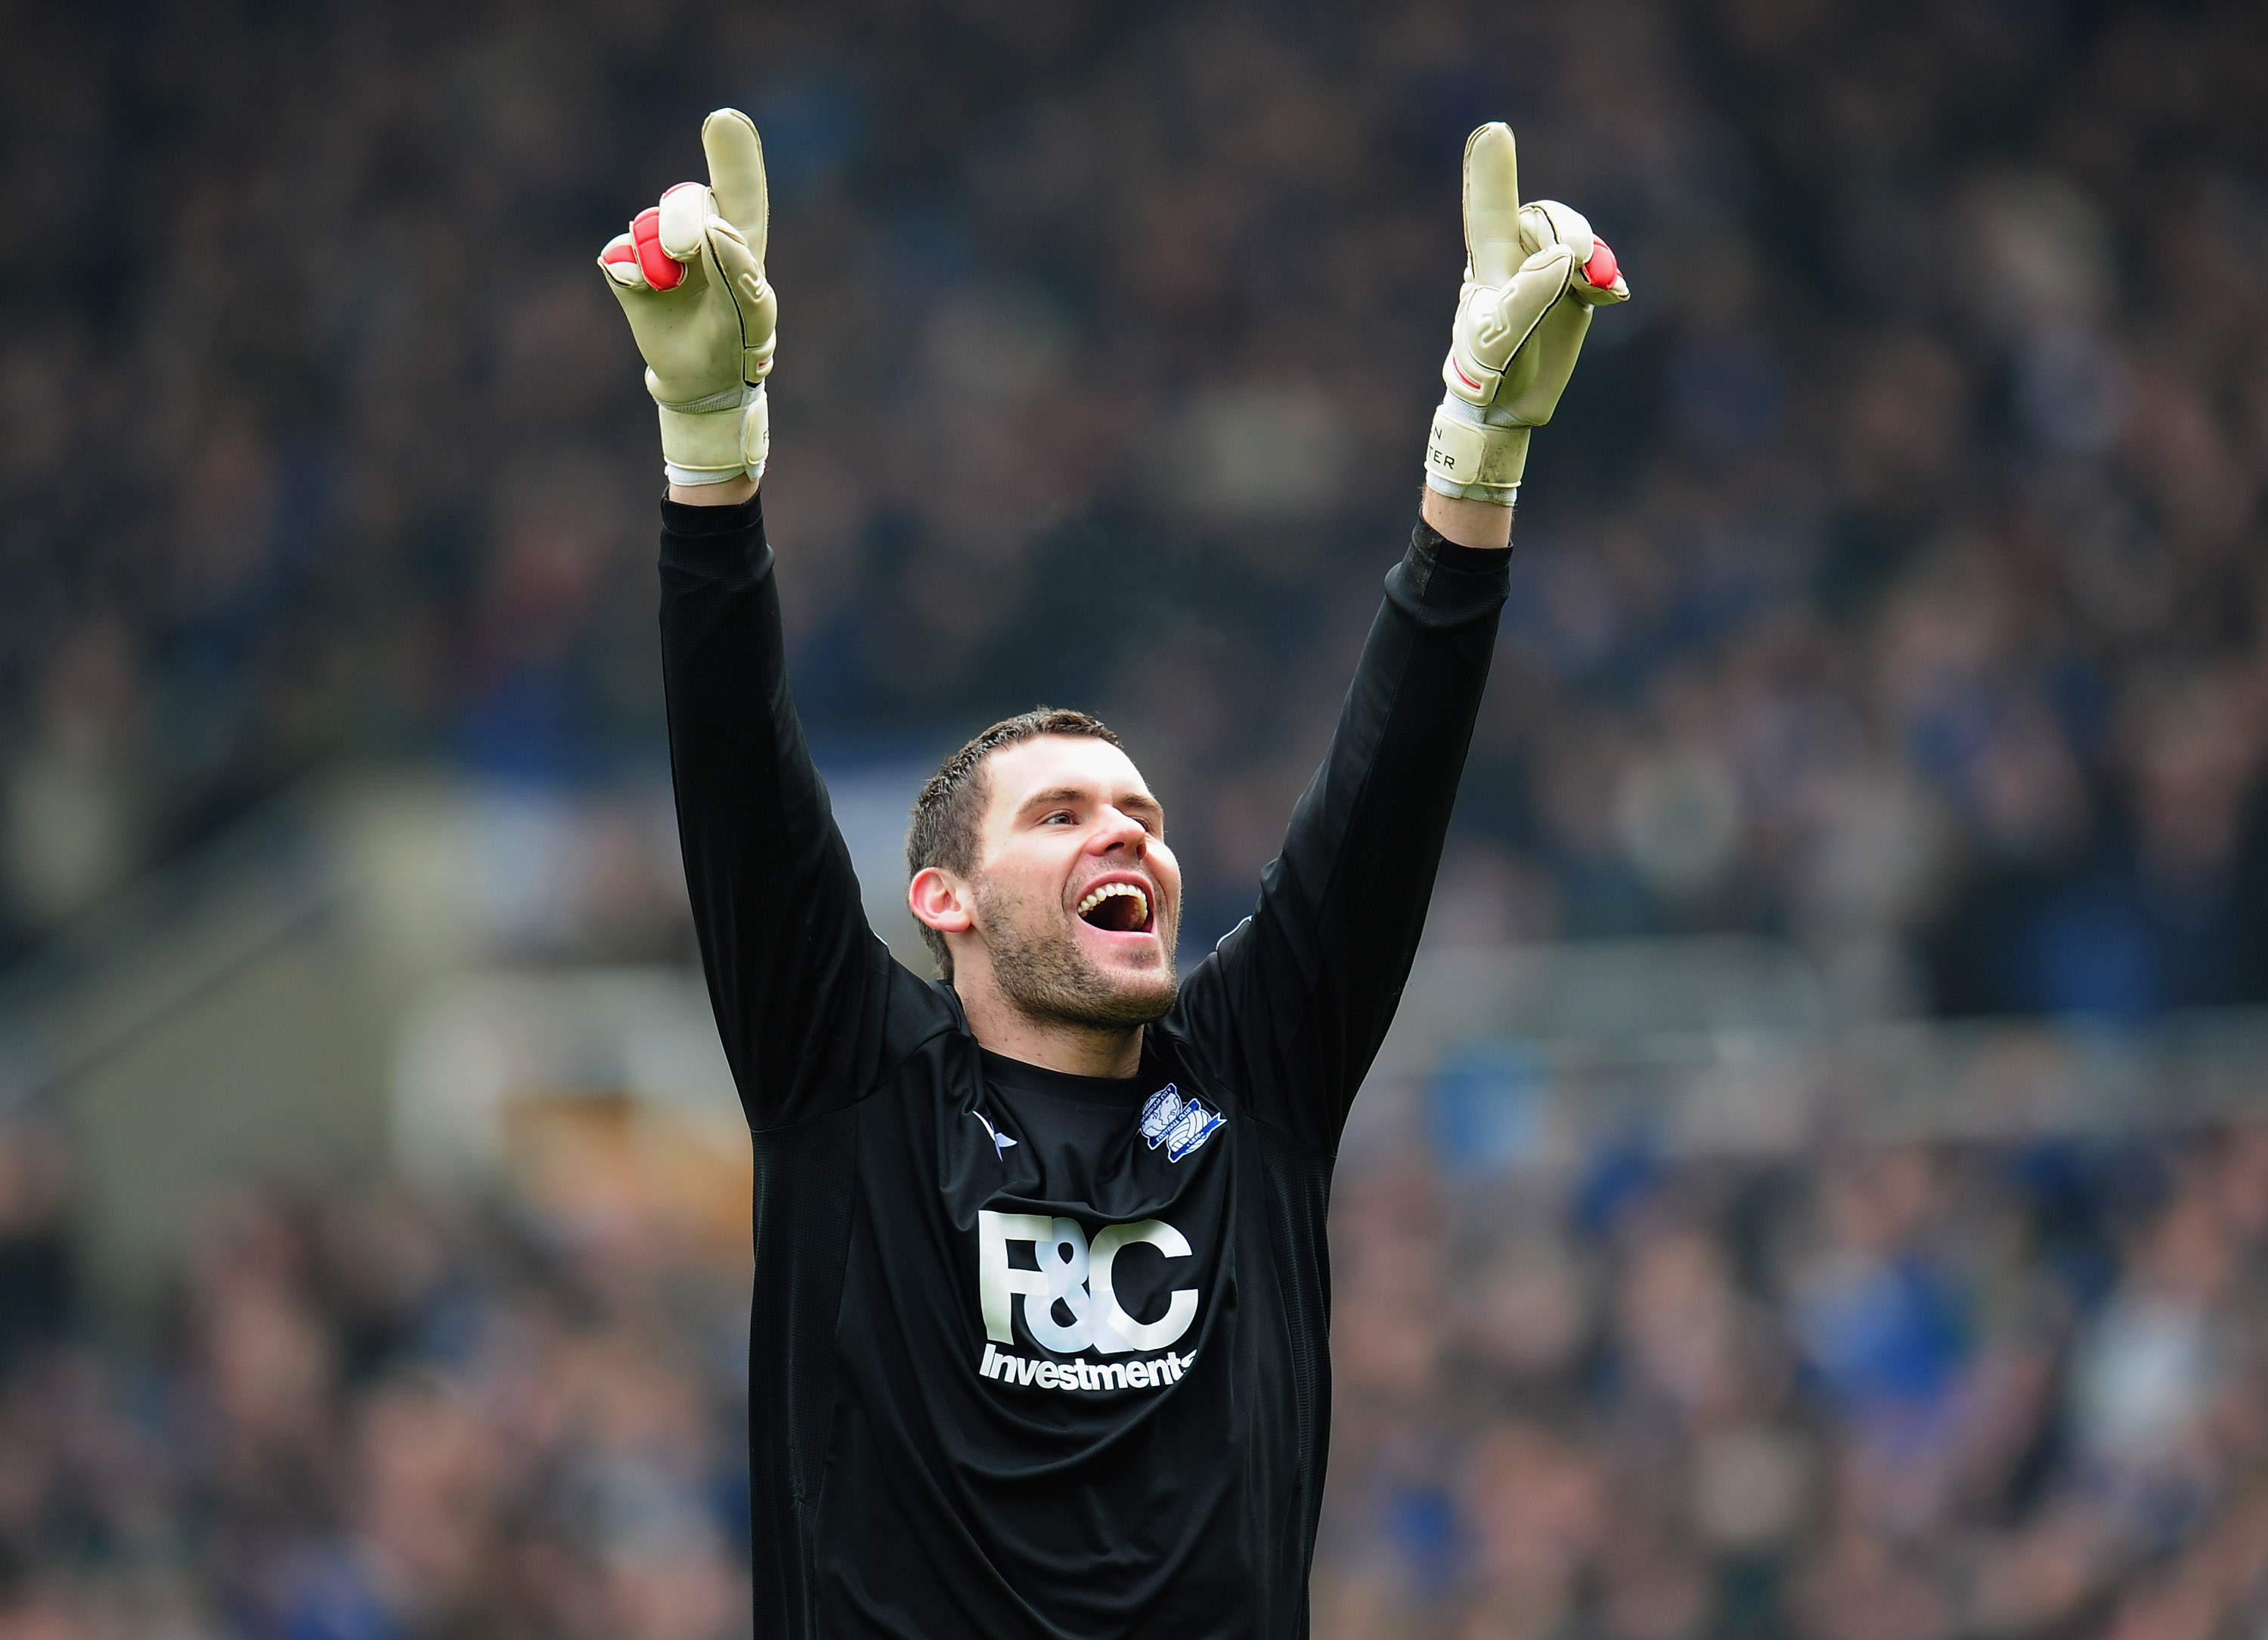 BIRMINGHAM, ENGLAND - MARCH 05:  Ben Foster celebrates after his team score during the Barclays Premier League match between Birmingham City and West Bromwich Albion  on March 5, 2011 in Birmingham, England.  (Photo by Shaun Botterill/Getty Images)